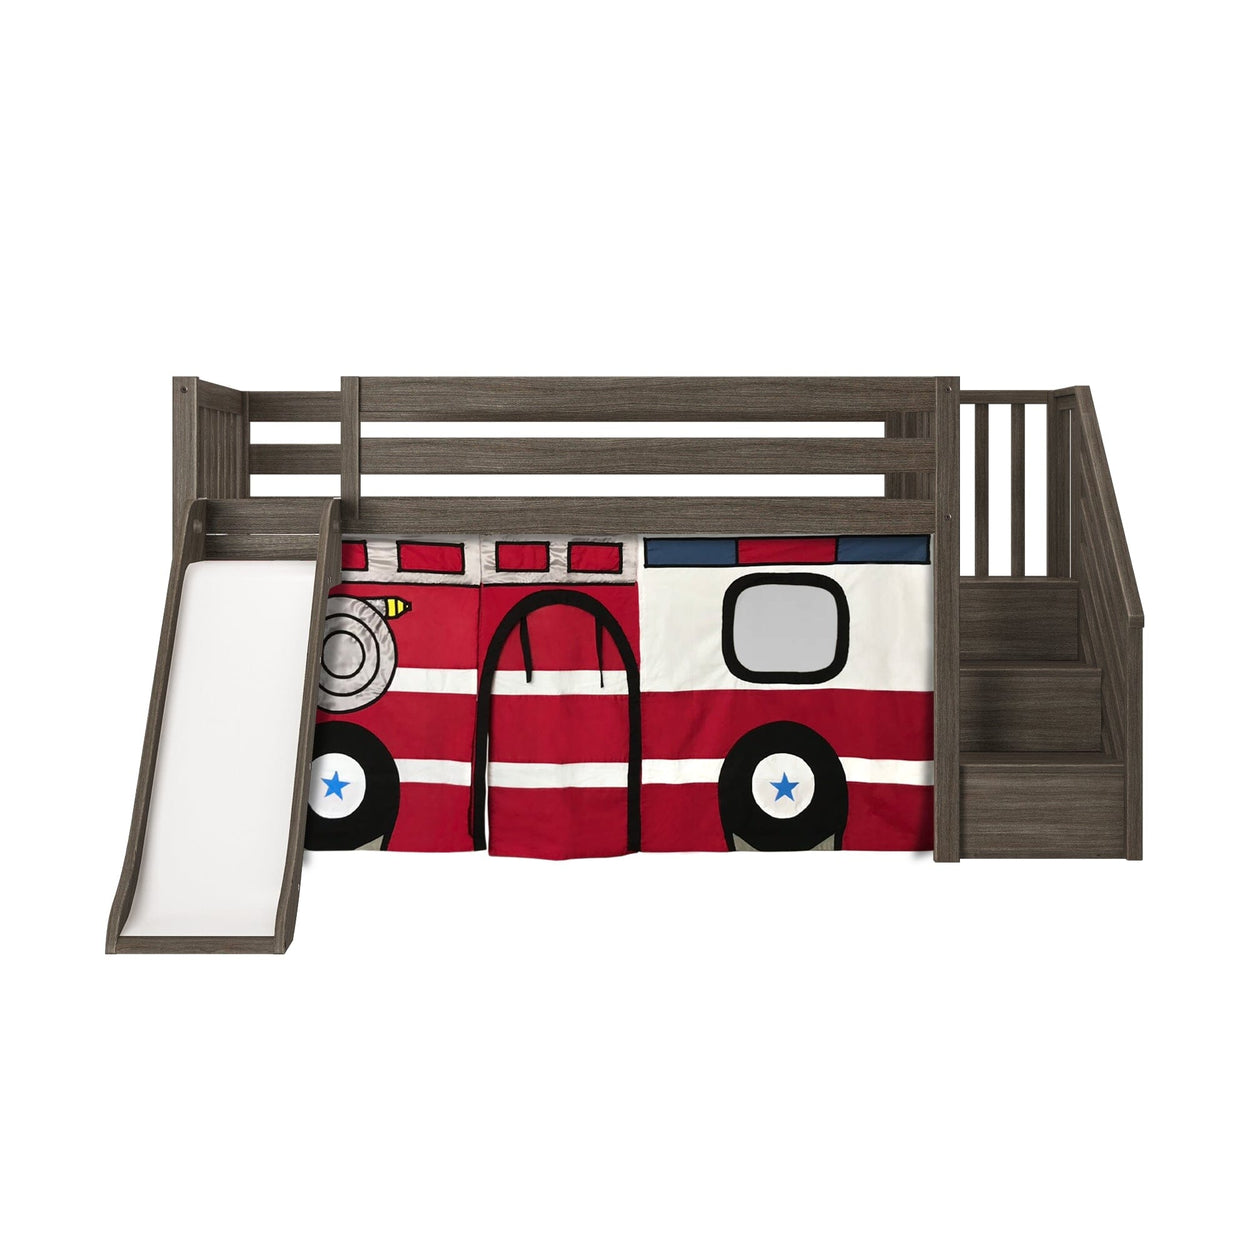 180425151043 : Loft Beds Low Loft with Stairs, Easy Slide and Firetruck Curtain, Clay